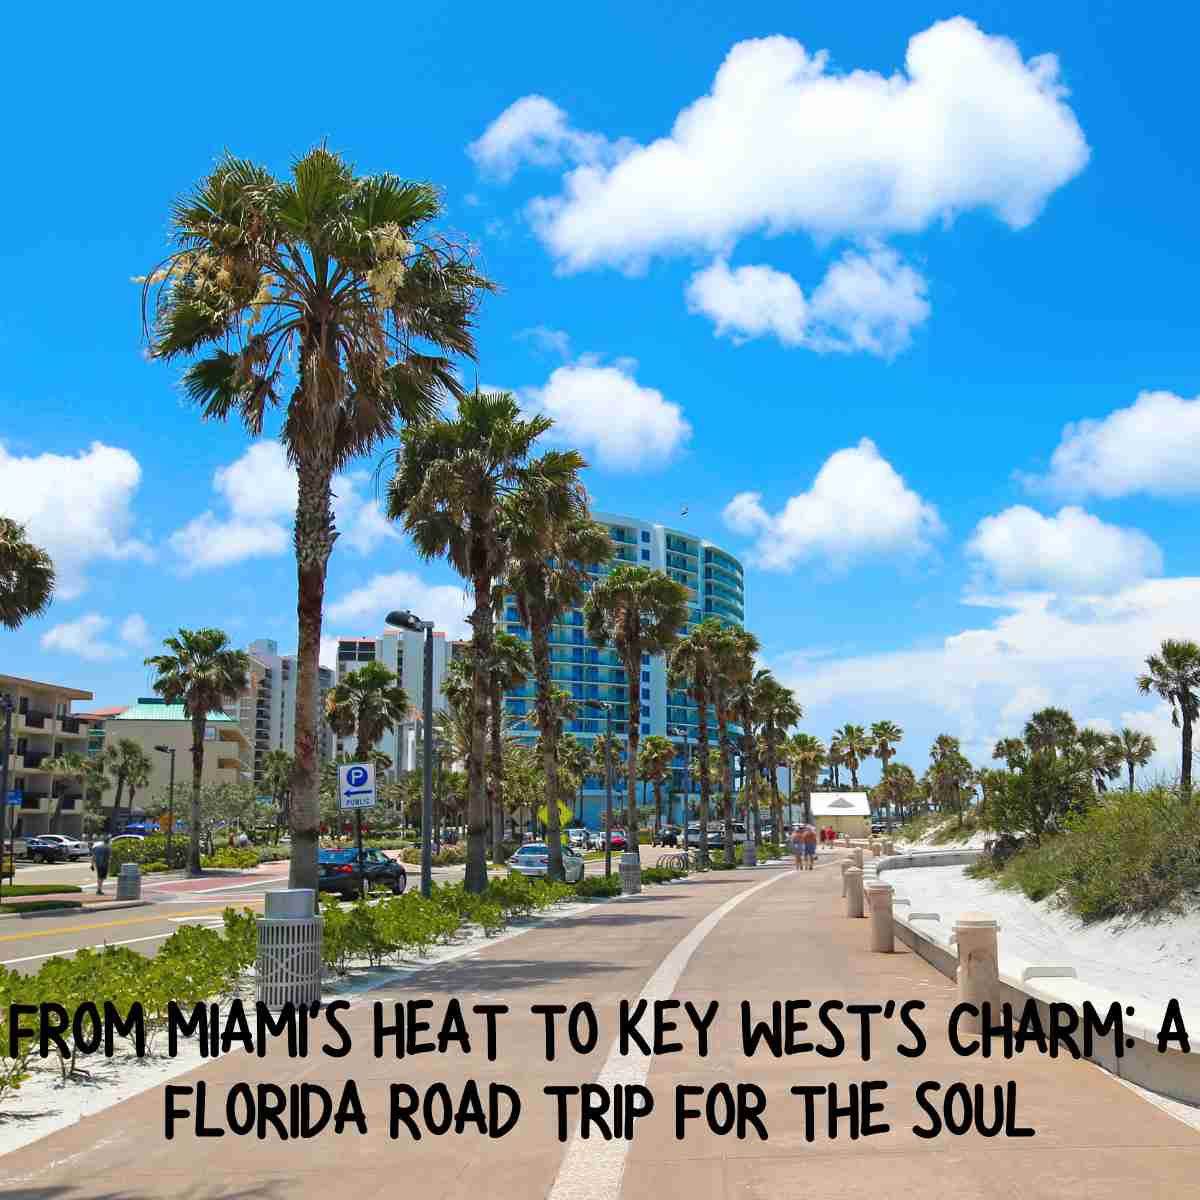 A Florida Road Trip for the Soul